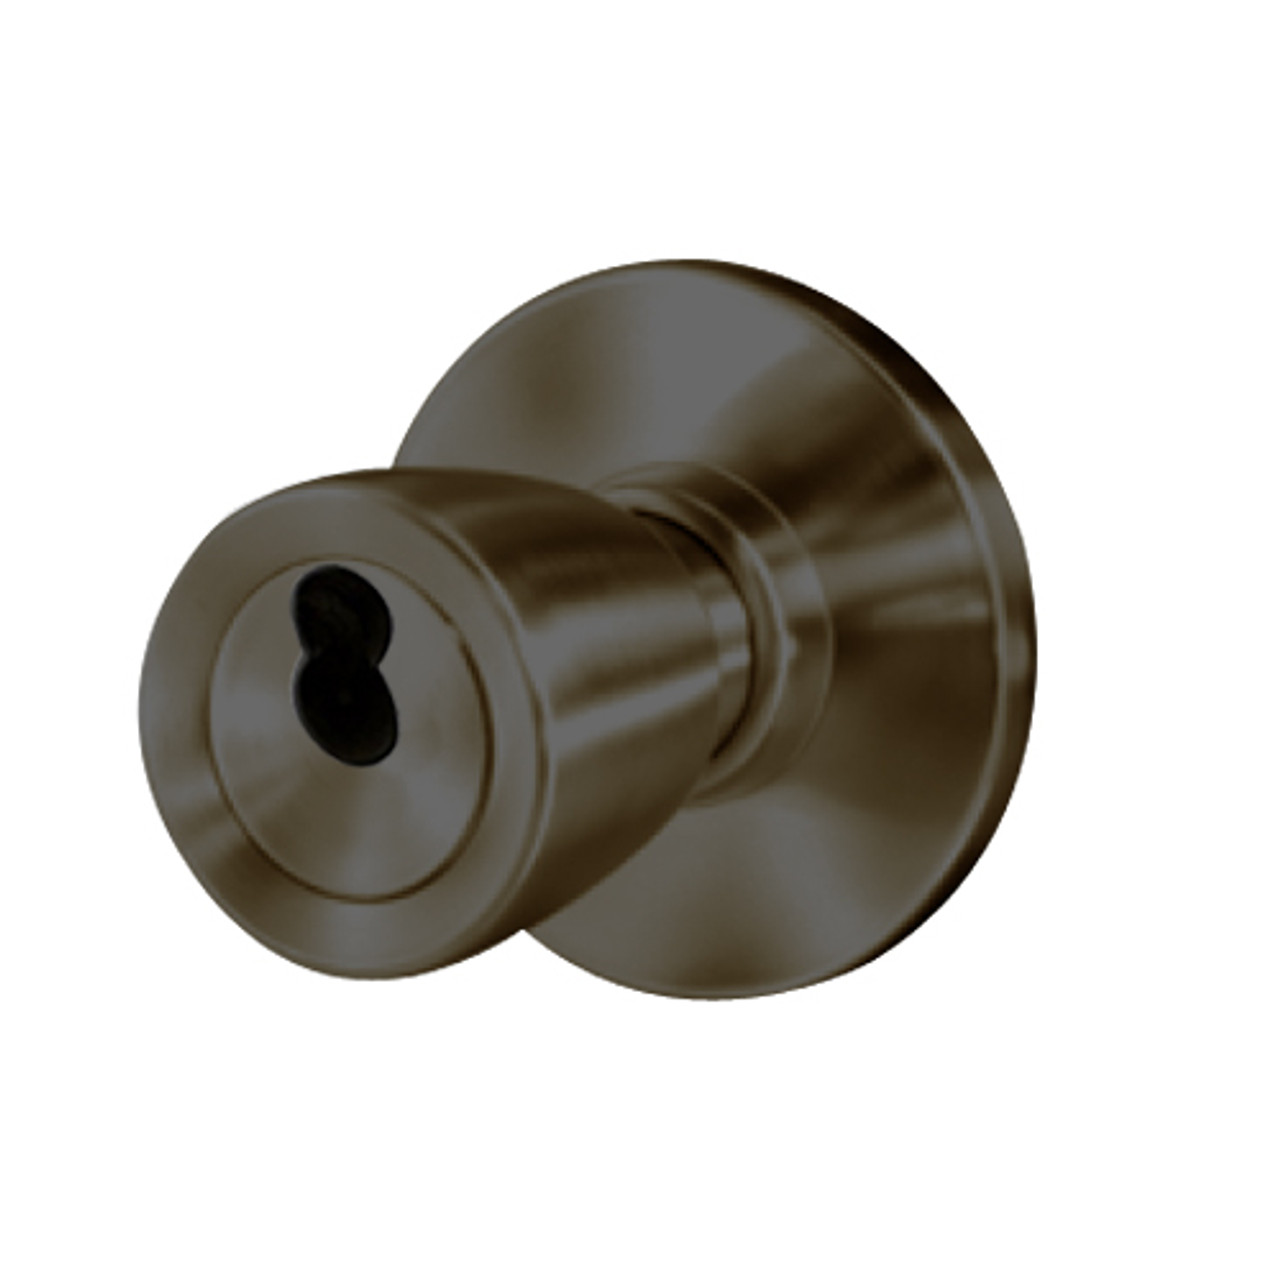 8K37AB6AS3613 Best 8K Series Entrance Heavy Duty Cylindrical Knob Locks with Tulip Style in Oil Rubbed Bronze